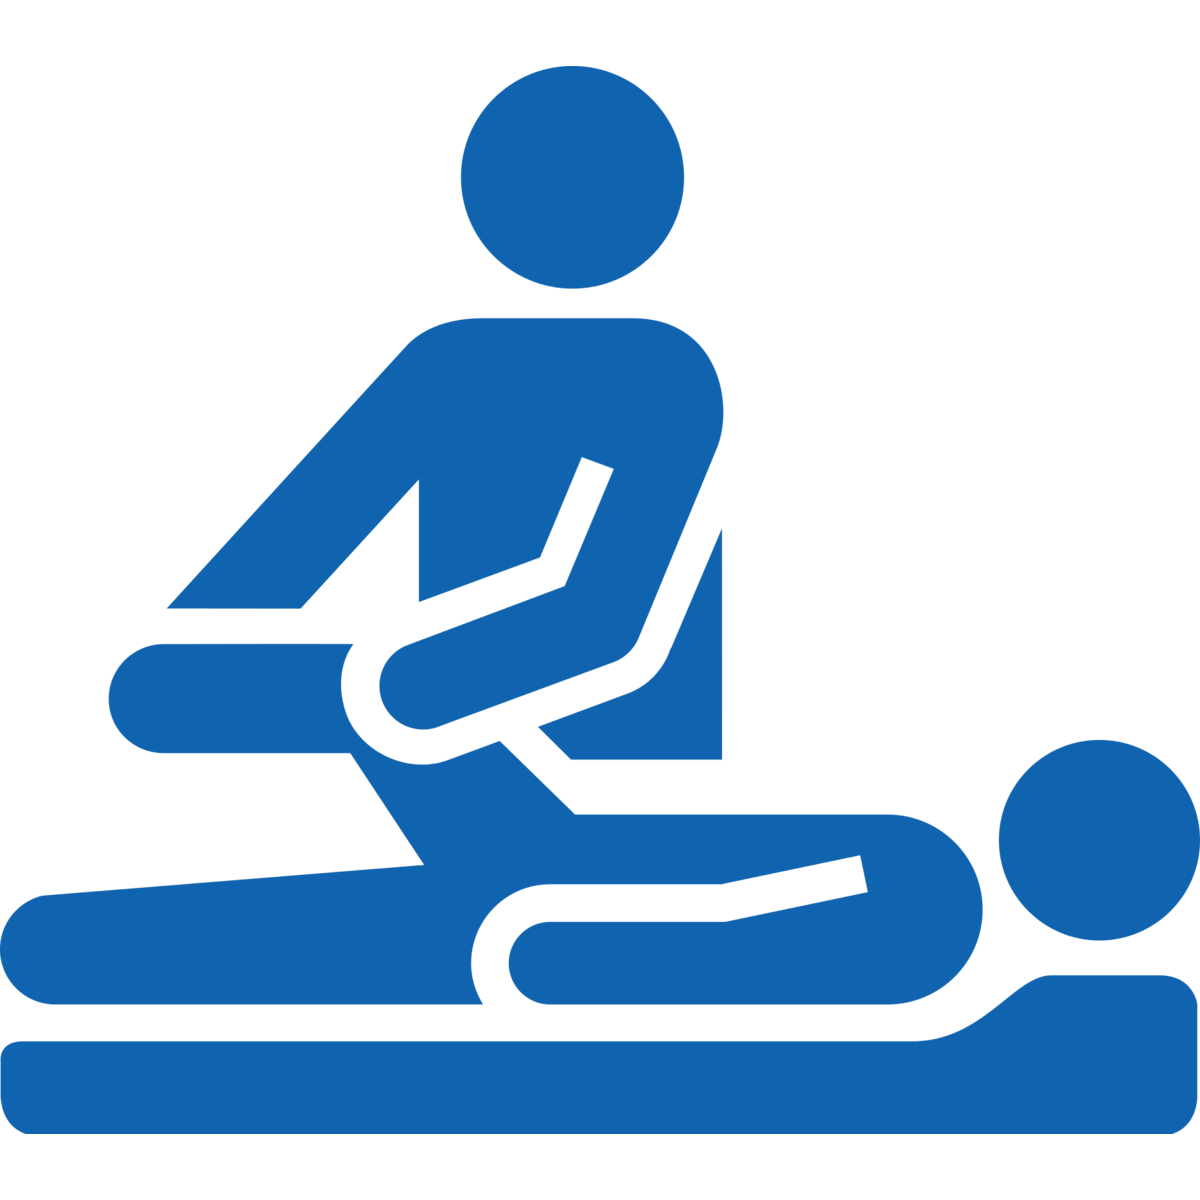 therapy clipart acupressure